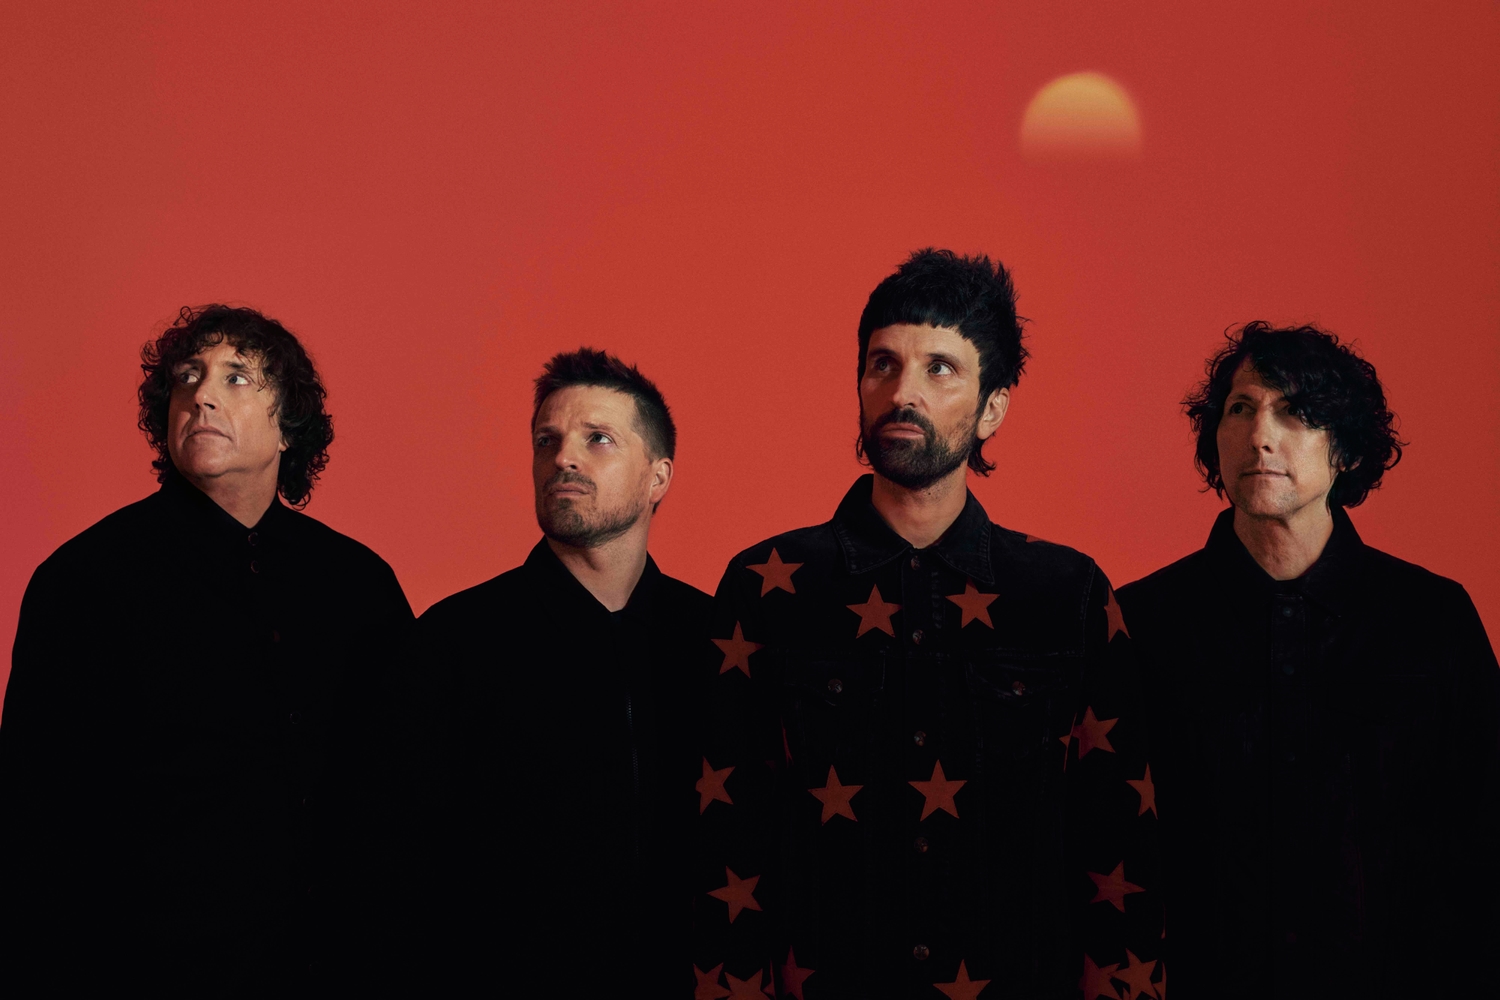 Kasabian announce new album 'Happenings' and share lead single 'Call'